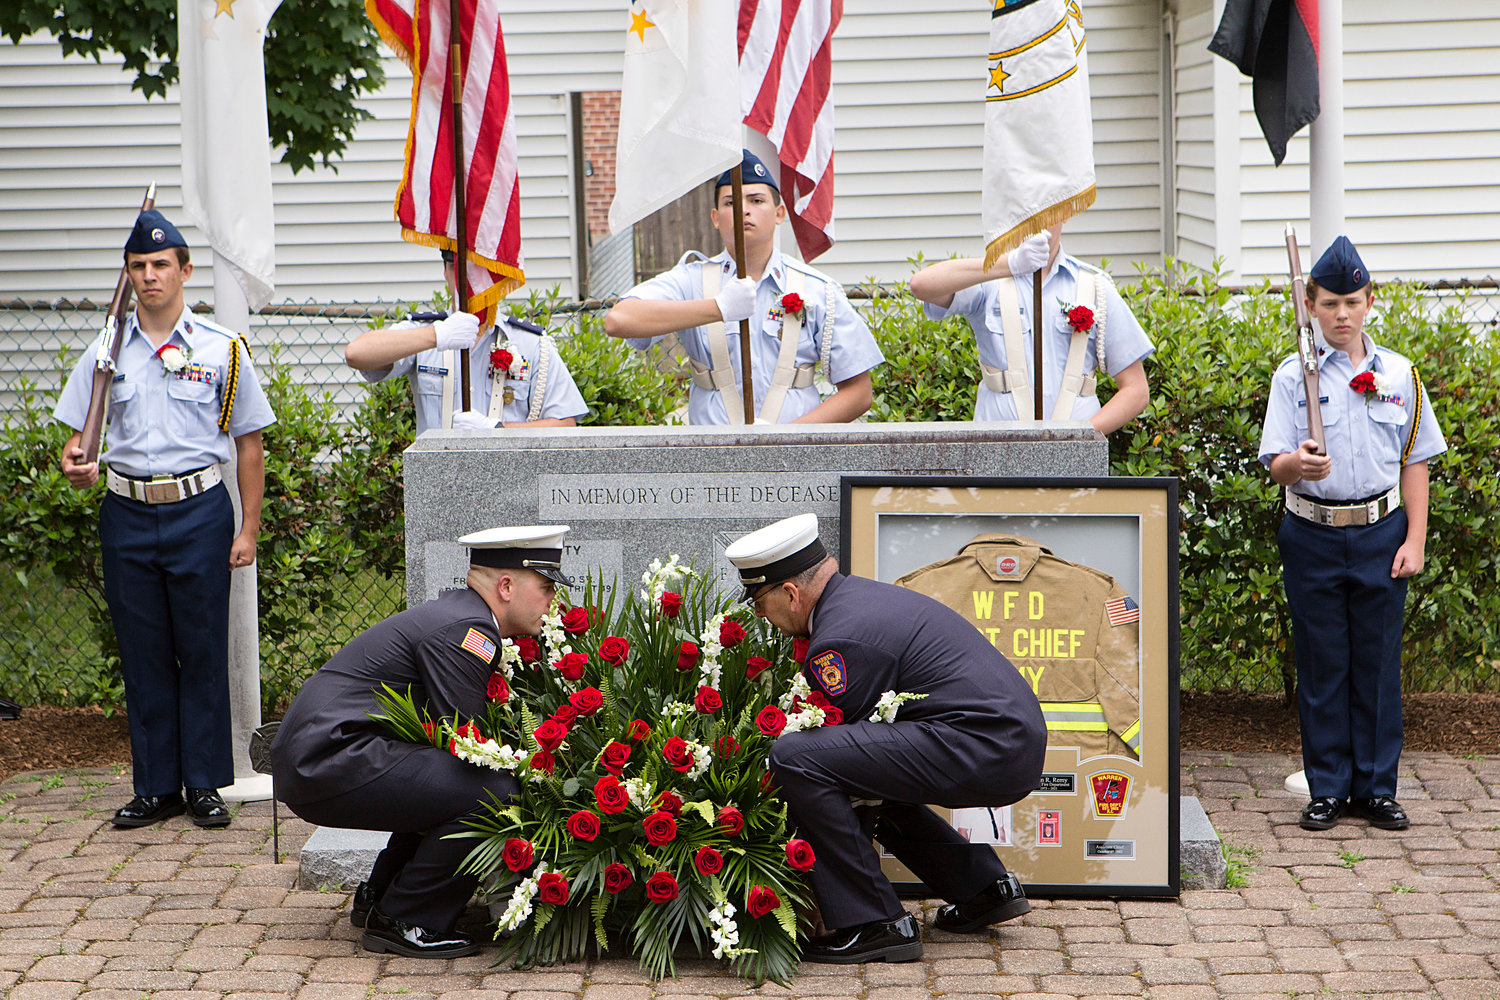 A pair of firefighters place red and white flowers on a memorial site in remembrance of deceased members of the Warren Fire Department, which included a dedication to former Assistant Fire Chief, Brian Remy, who passed away last year.